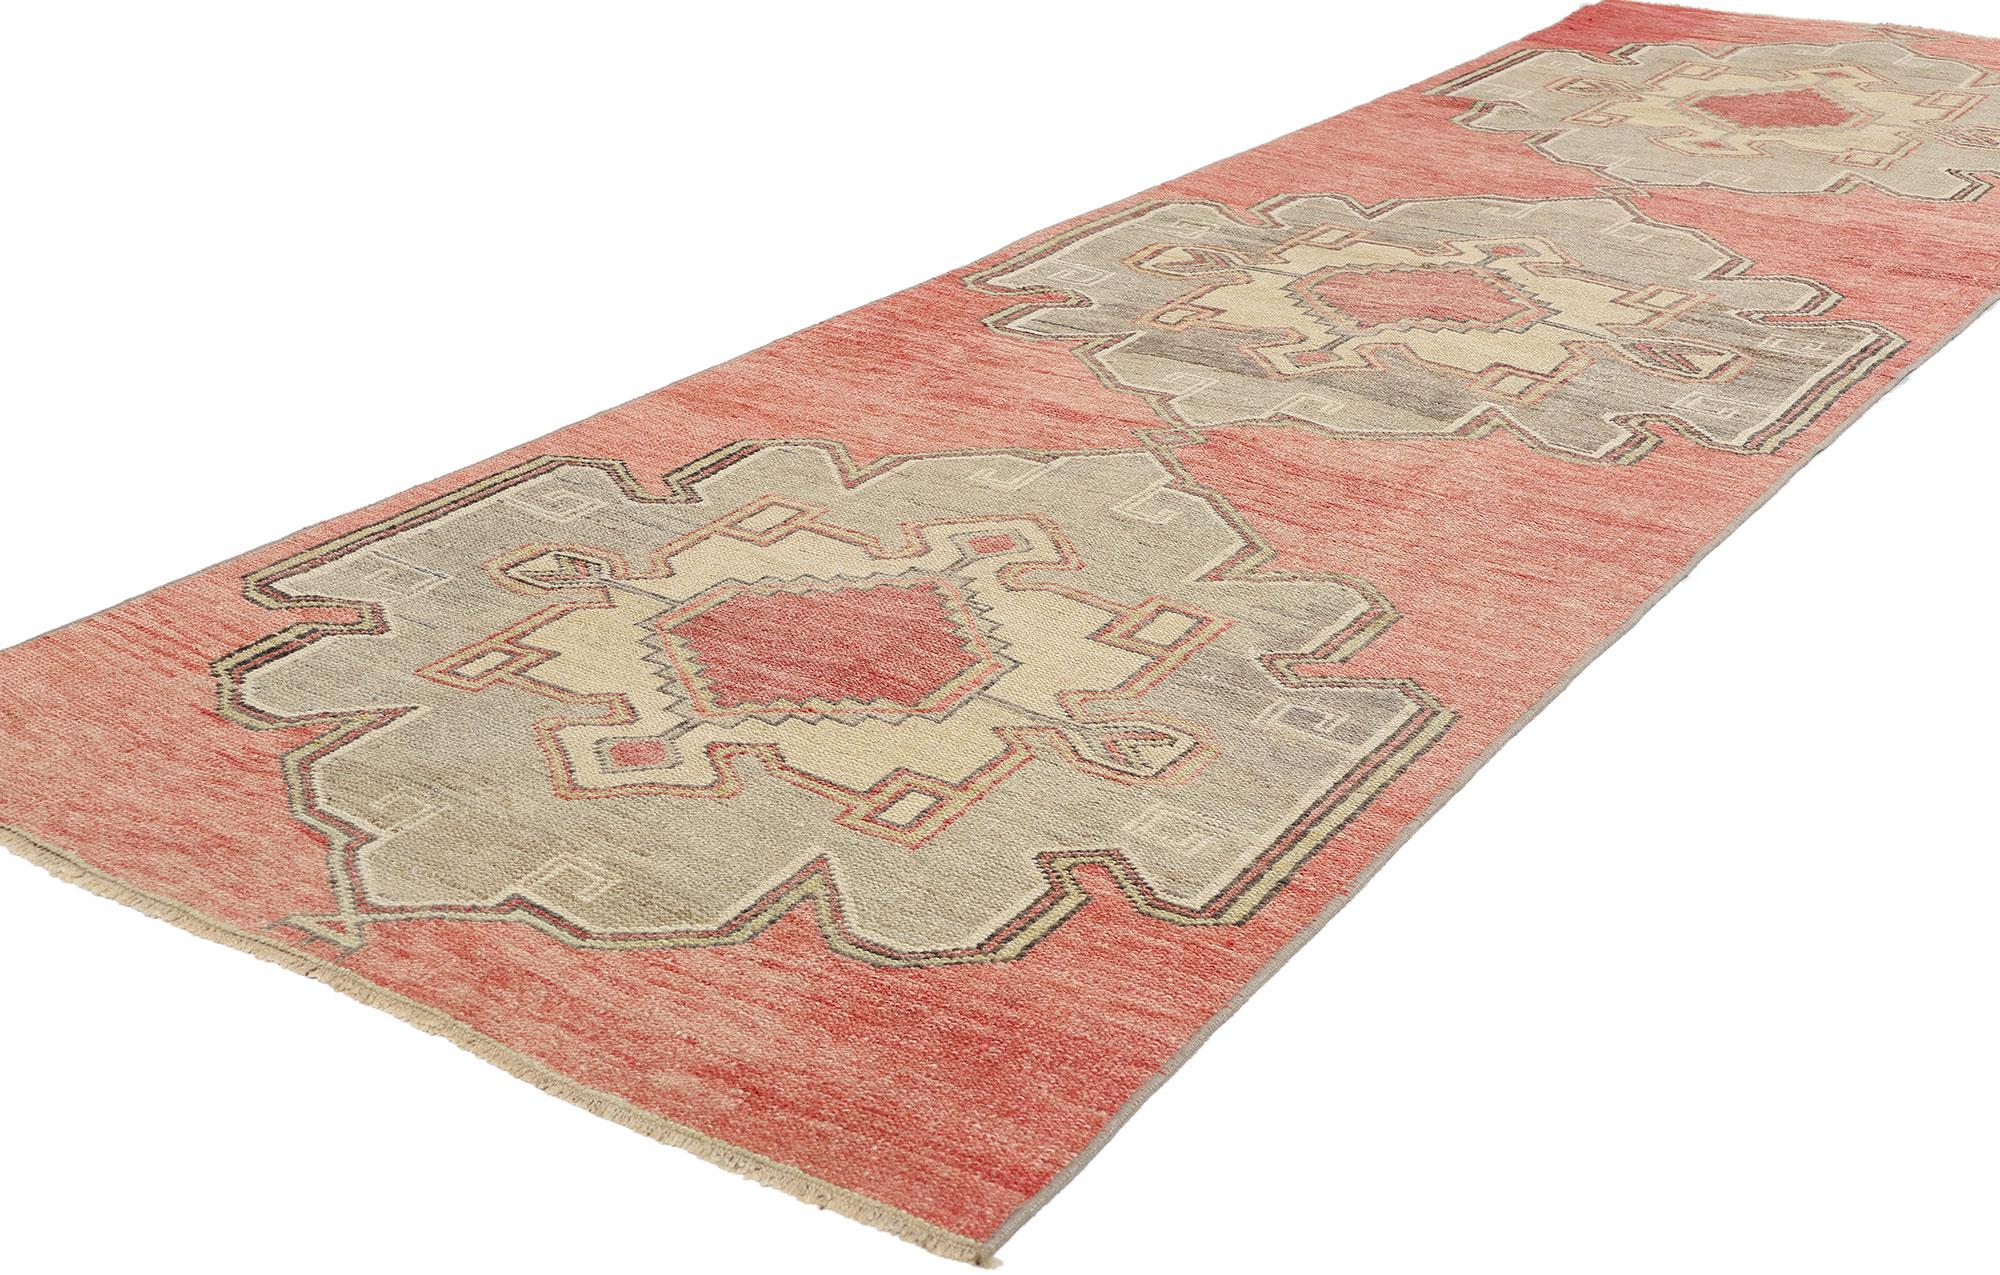 53916 Vintage Red Turkish Oushak Runner, 03'03 x 11'02. Please note this listing is for one piece. There is a matching piece available adds to its rarity. Originating from the Oushak region in western Turkey, Turkish Oushak carpet runners are